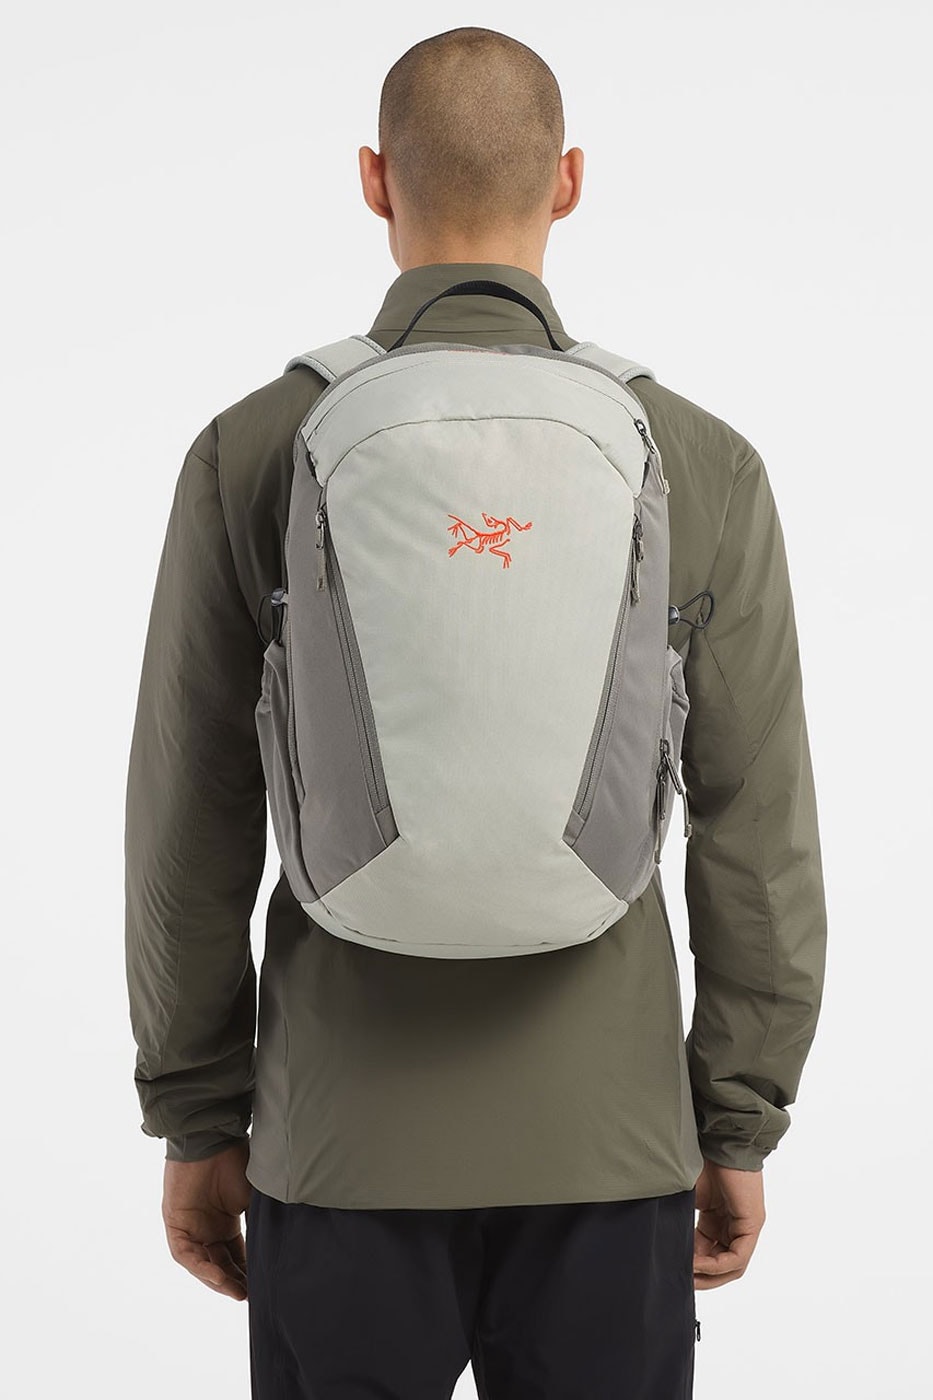 Arc'teryx Releases Its First Updated Version of Its "Mantis" Backpack outdoors accessories 16L capacity travel compact environmental